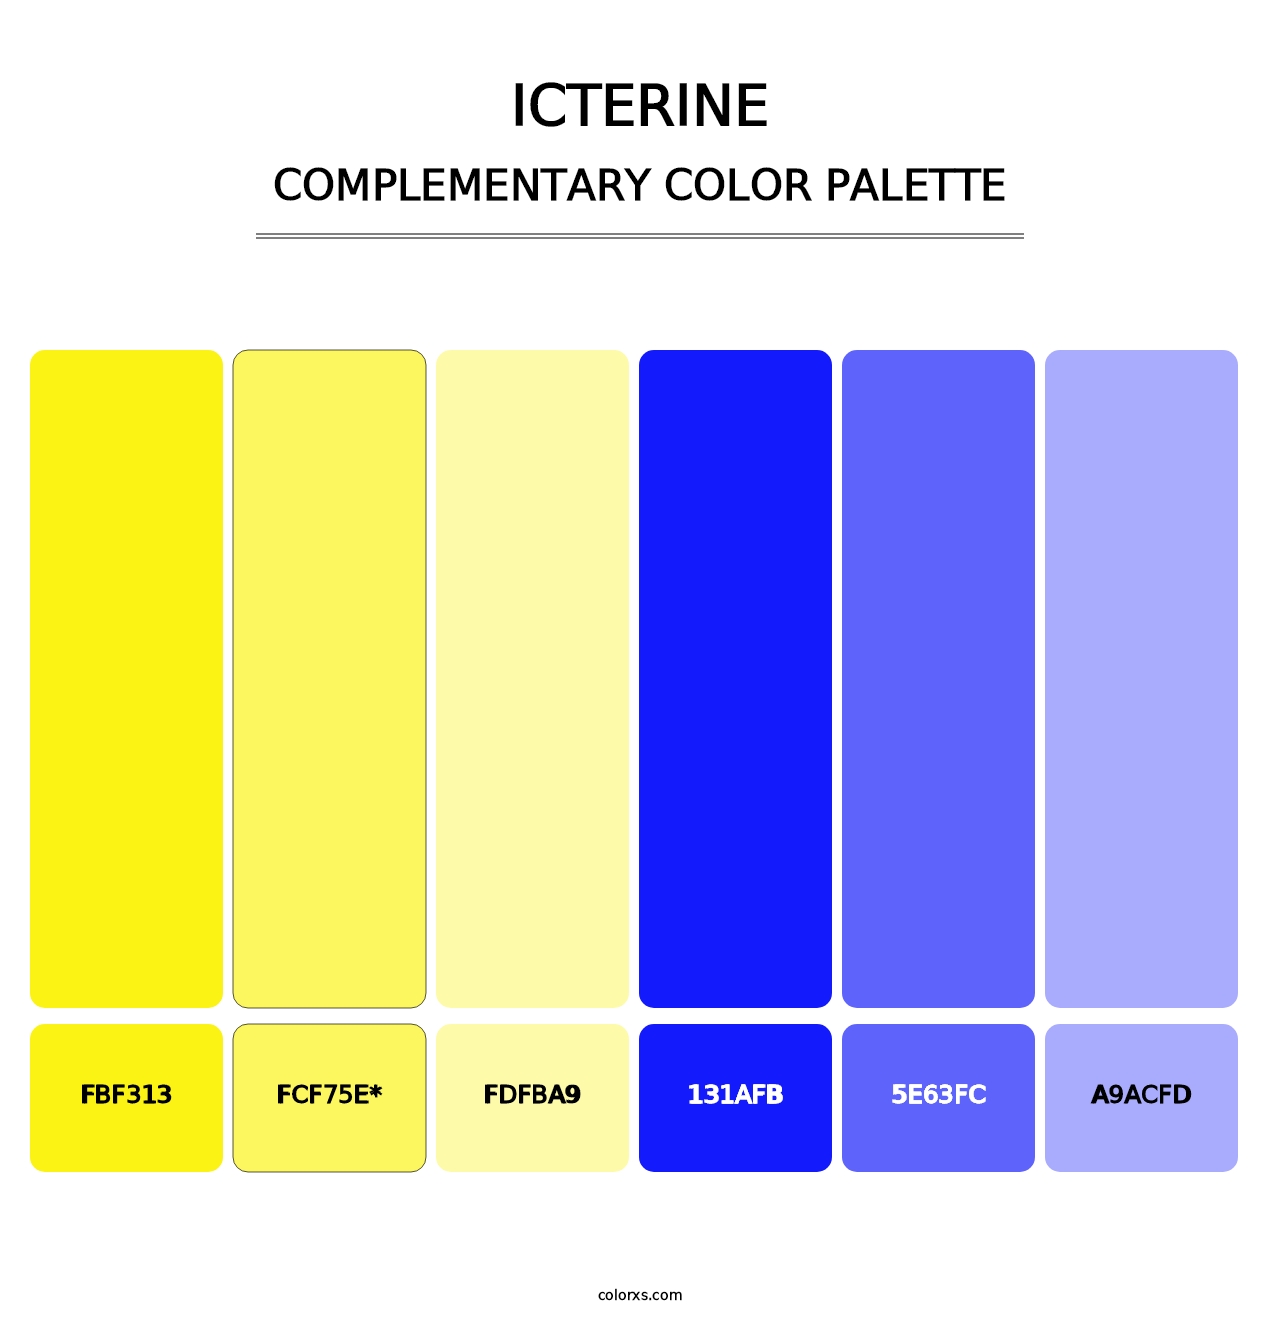 Icterine - Complementary Color Palette